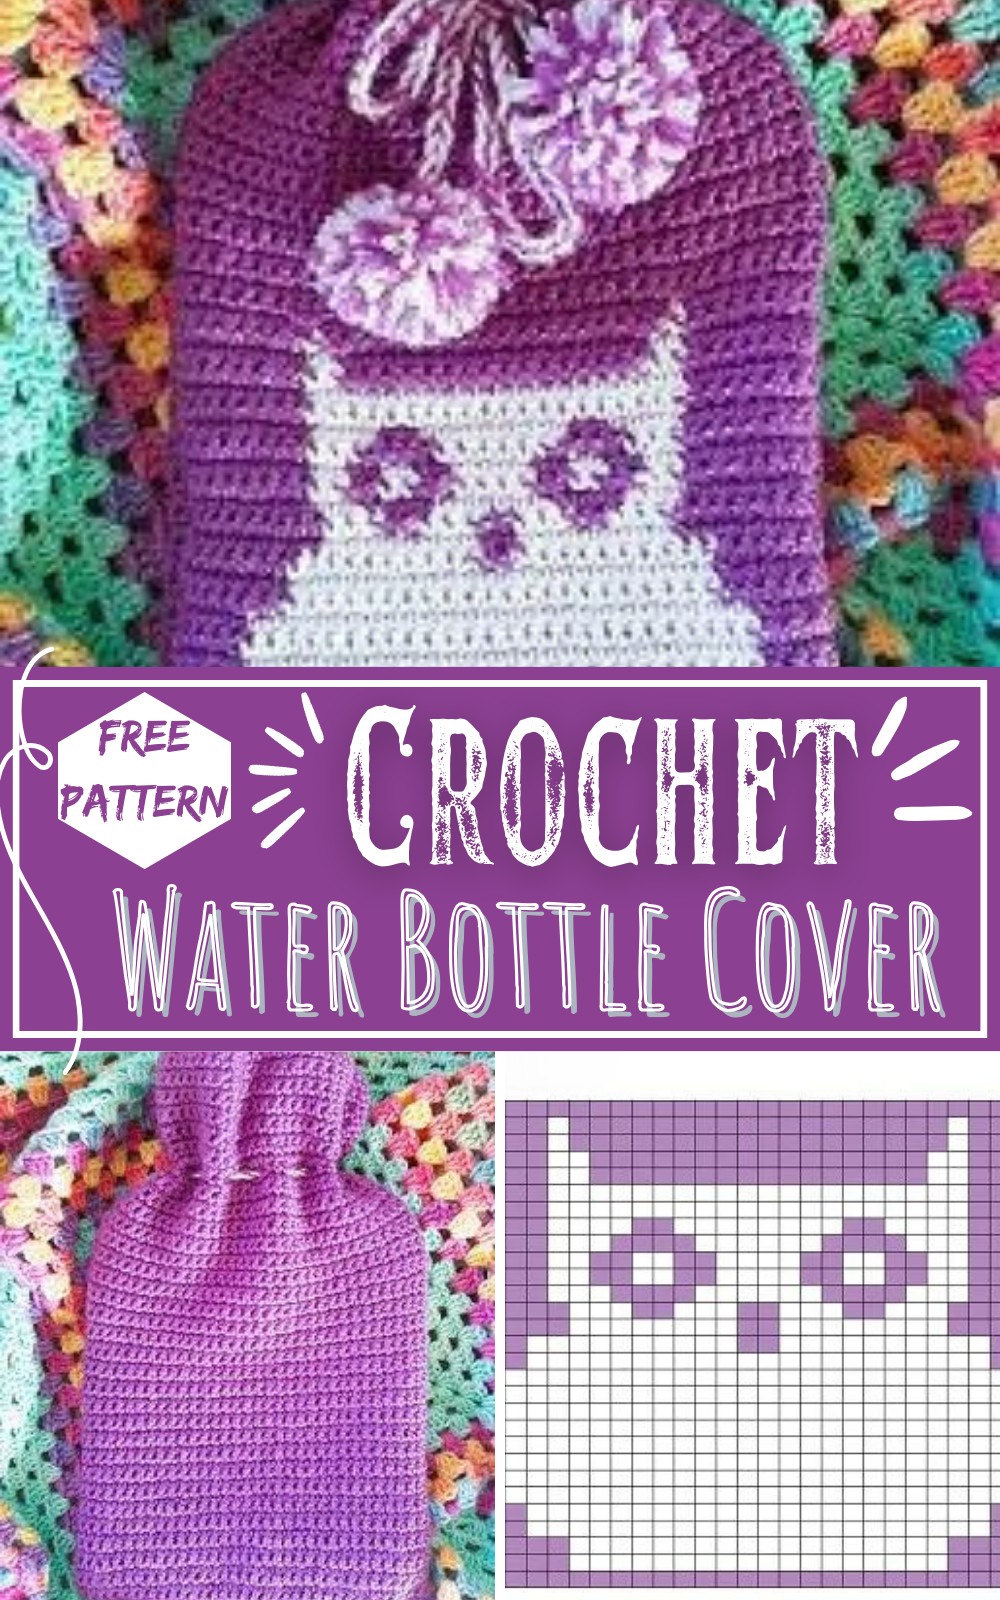 Crochet Water Bottle Cover With Owl Design